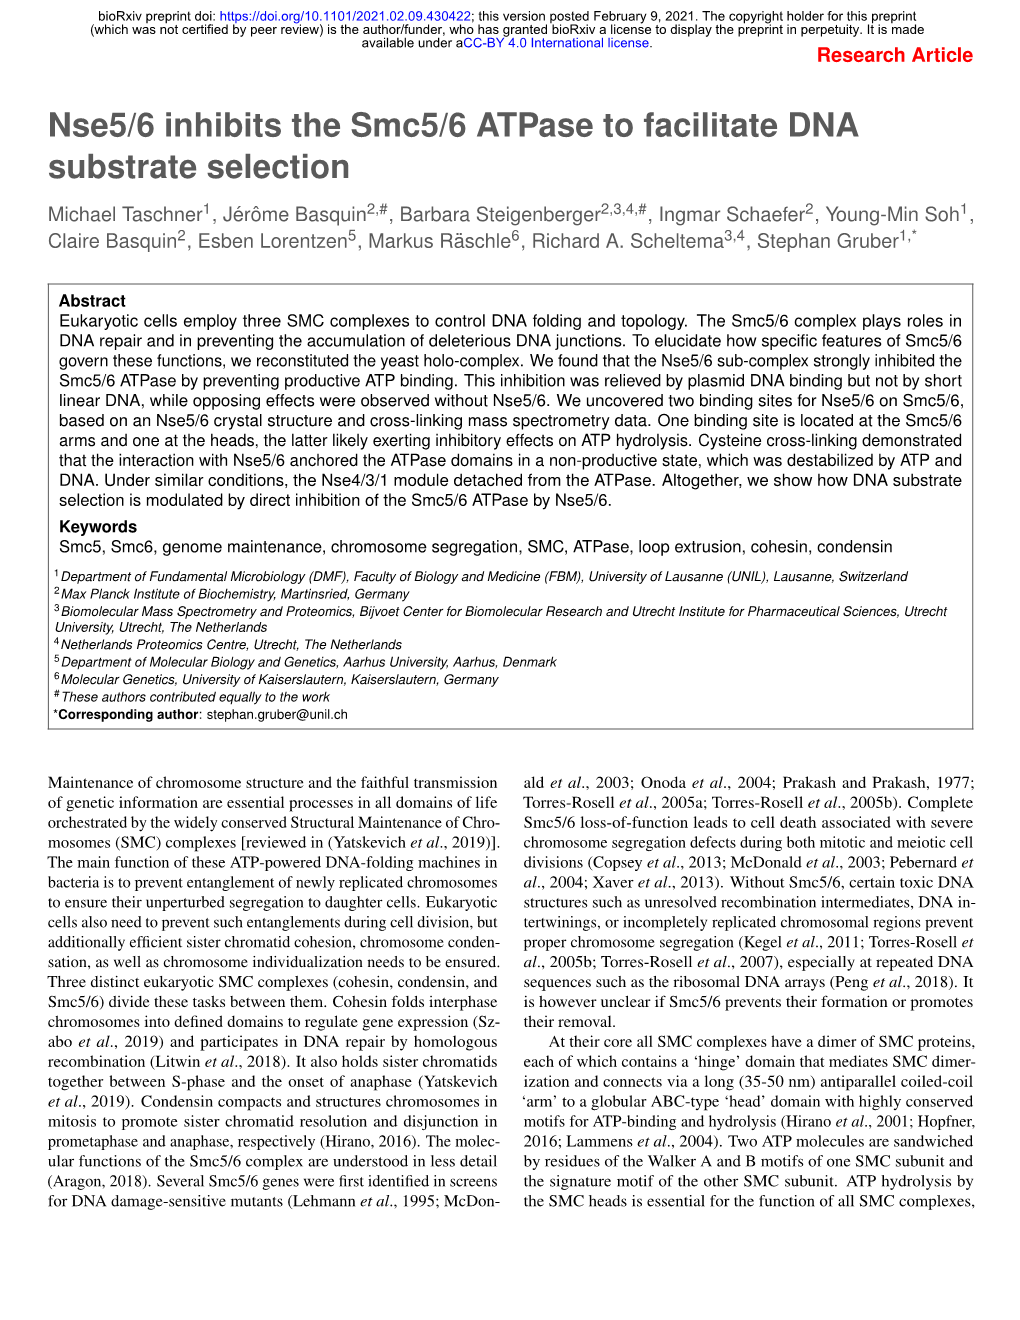 Nse5/6 Inhibits the Smc5/6 Atpase to Facilitate DNA Substrate Selection